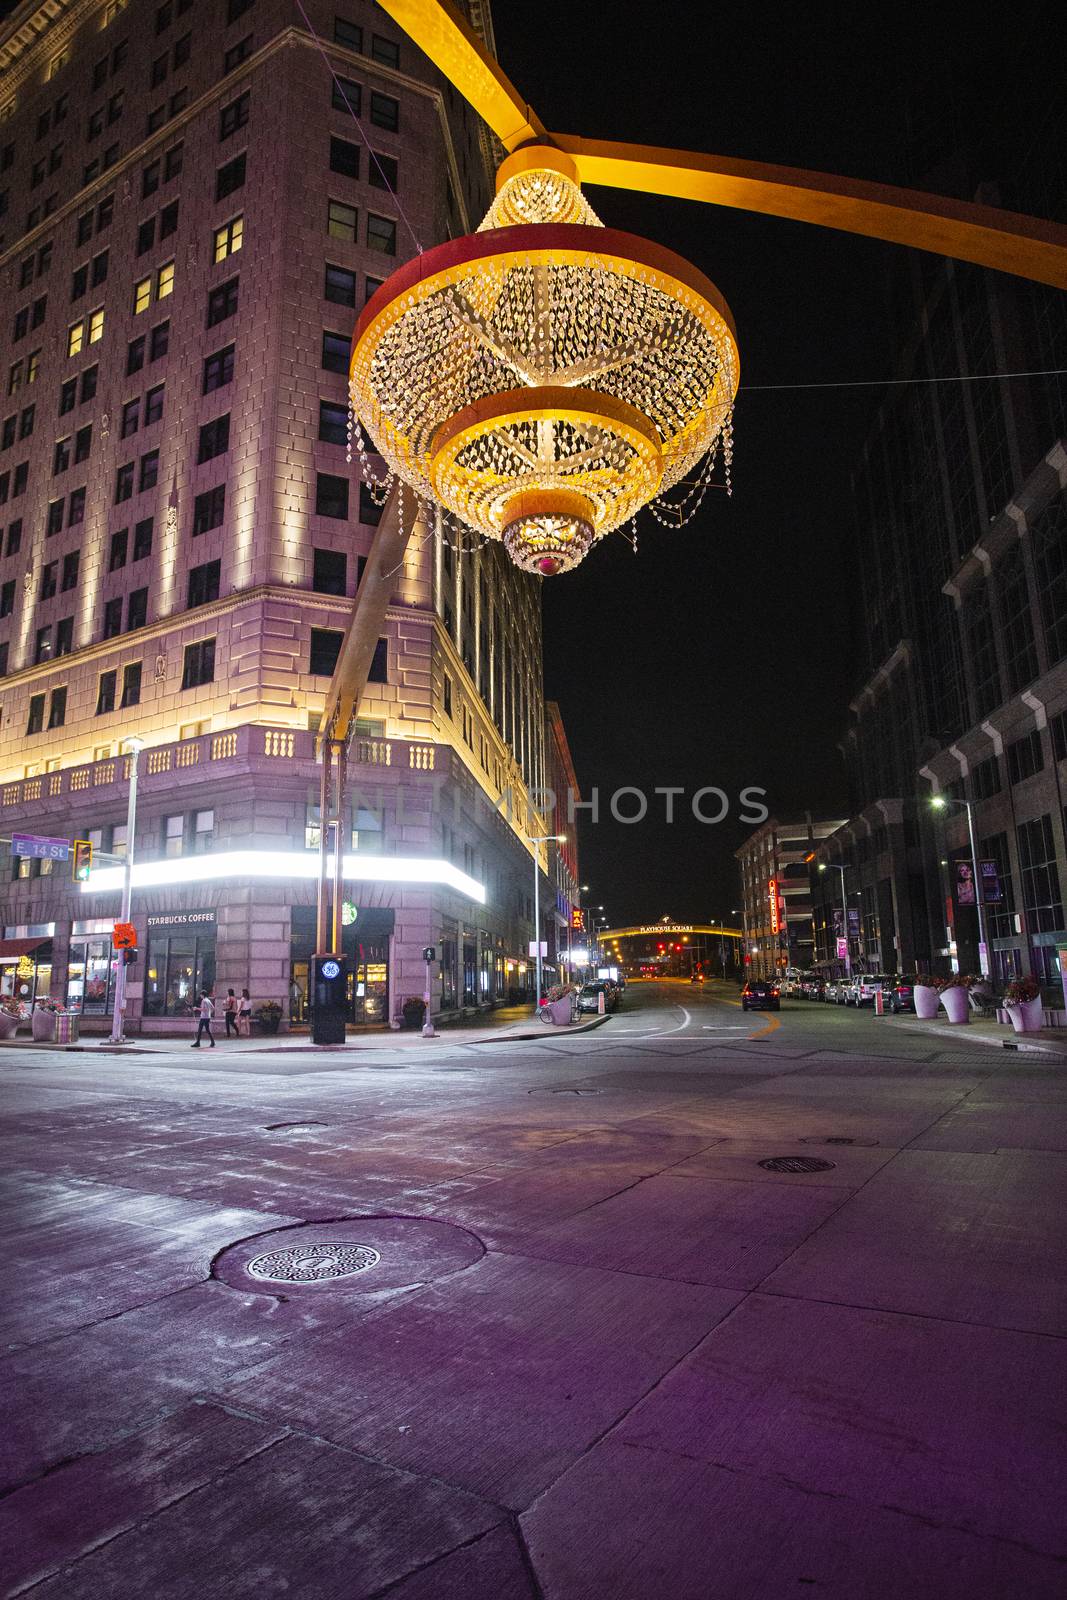 Cleveland theather district by mypstudio